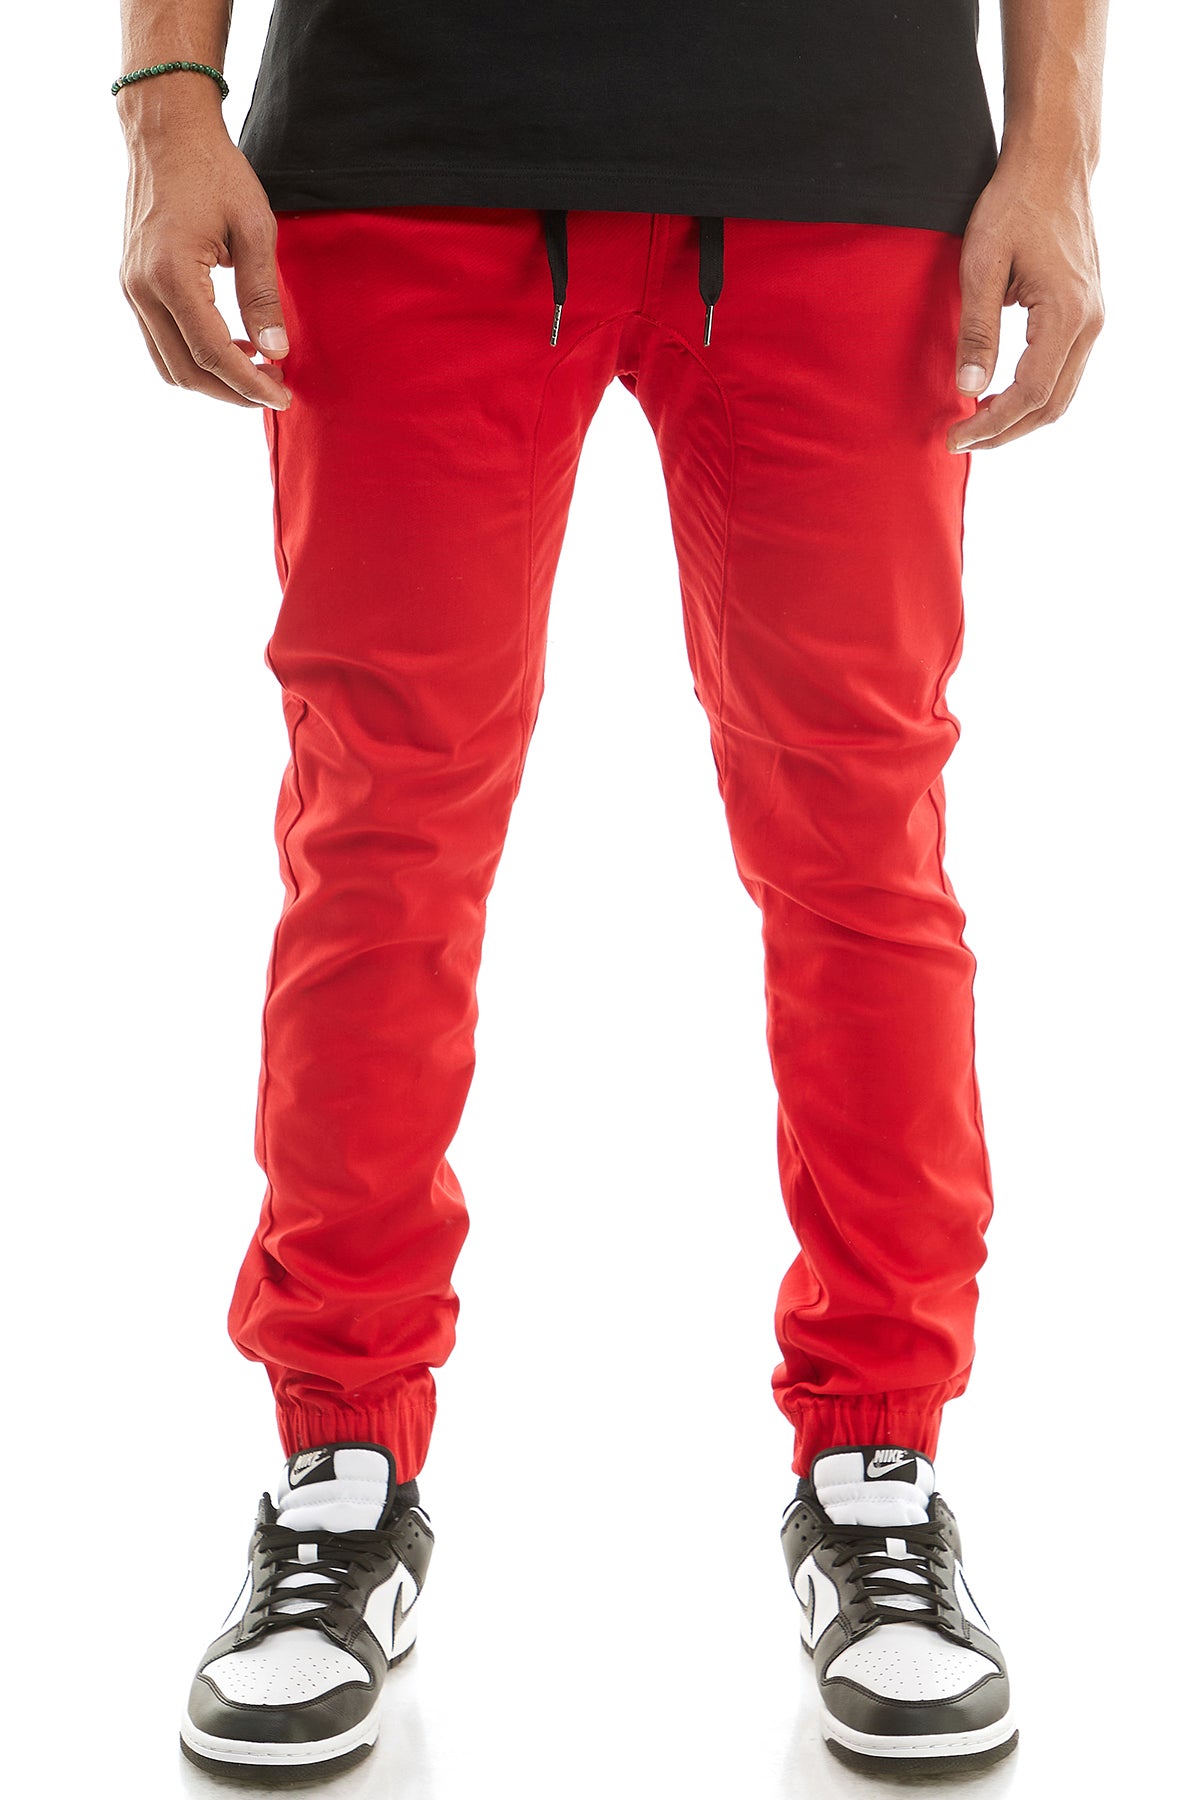 KDNK Men's Tapered Skinny Fit Joggers - Urban Drawstring Pants with Ankle  Zipper (Small, Red) : : Clothing, Shoes & Accessories